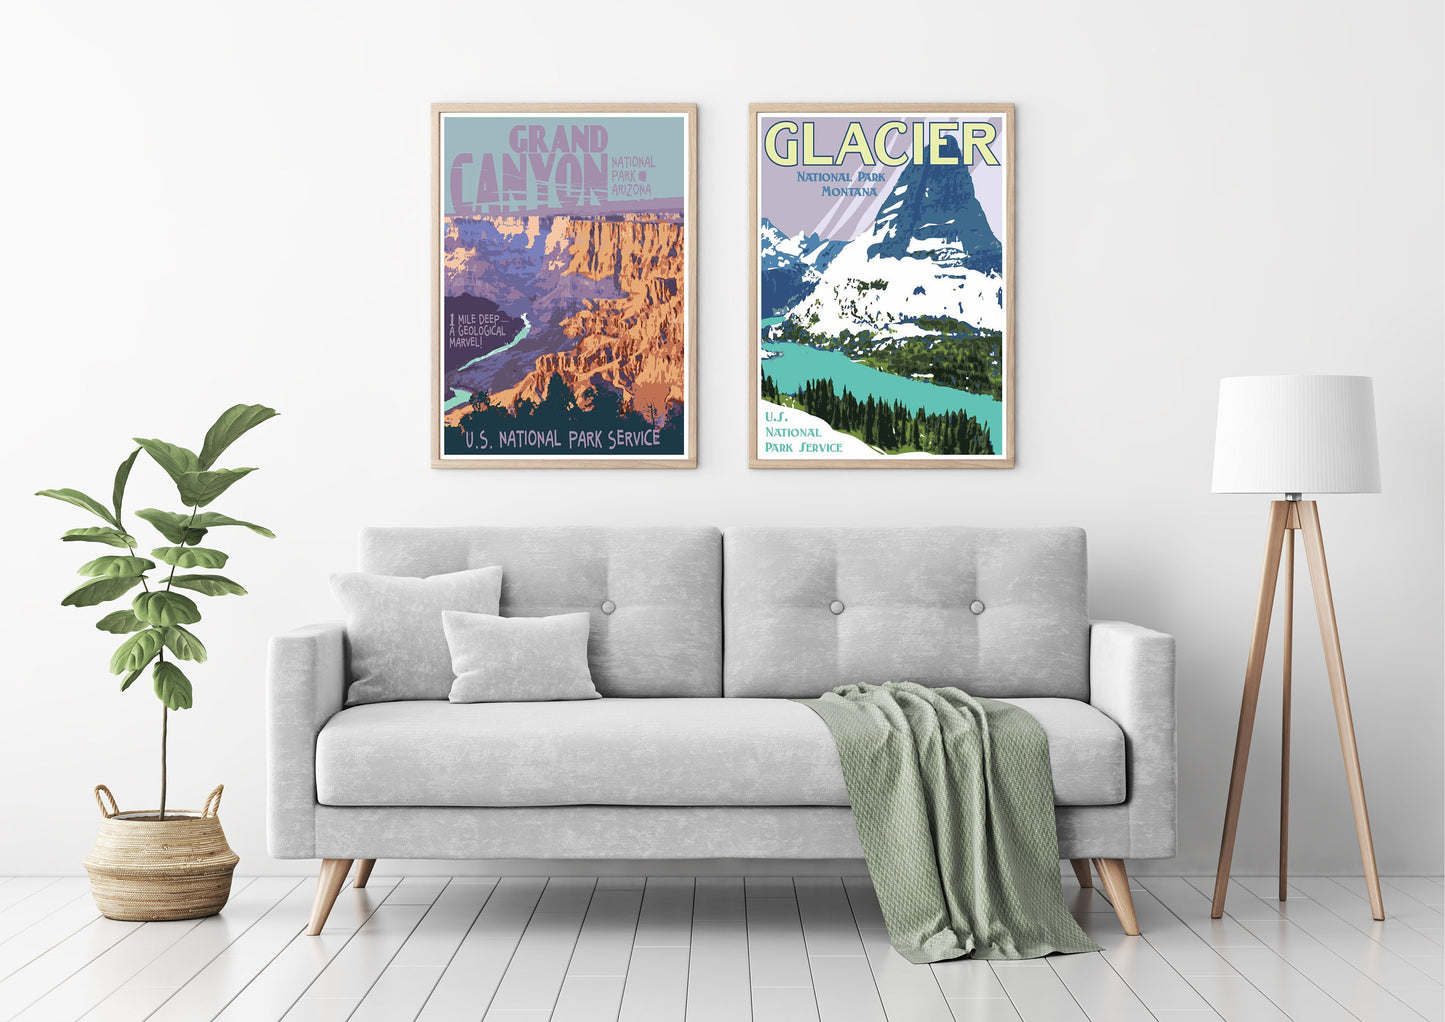 Grand Canyon National Park Print, Grand Canyon Poster, Vintage Style National Park Travel Art